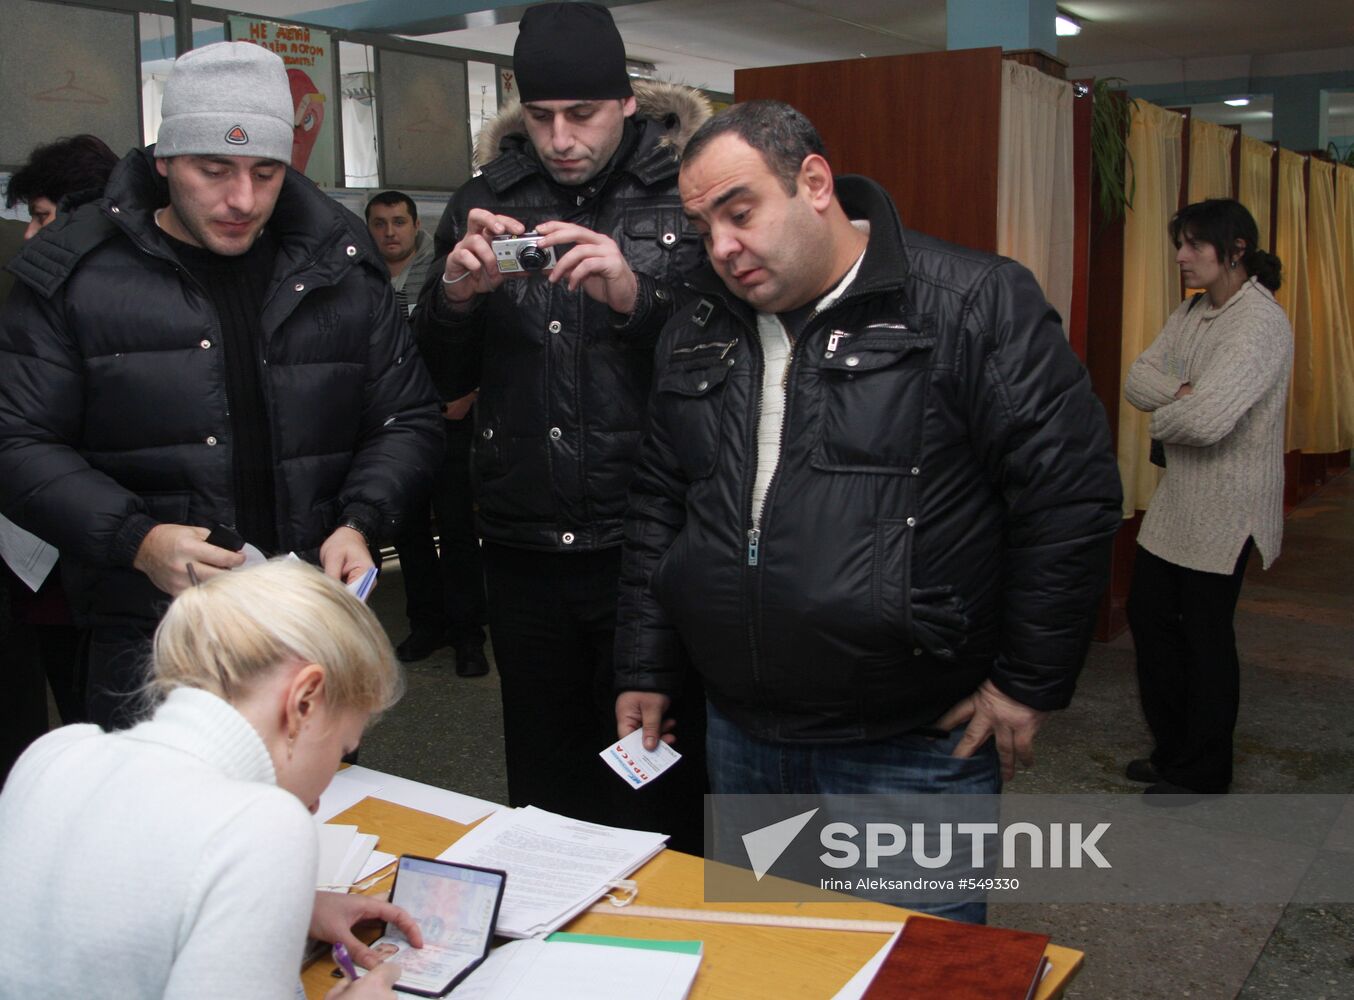 Georgian observers at polling station in Donetsk